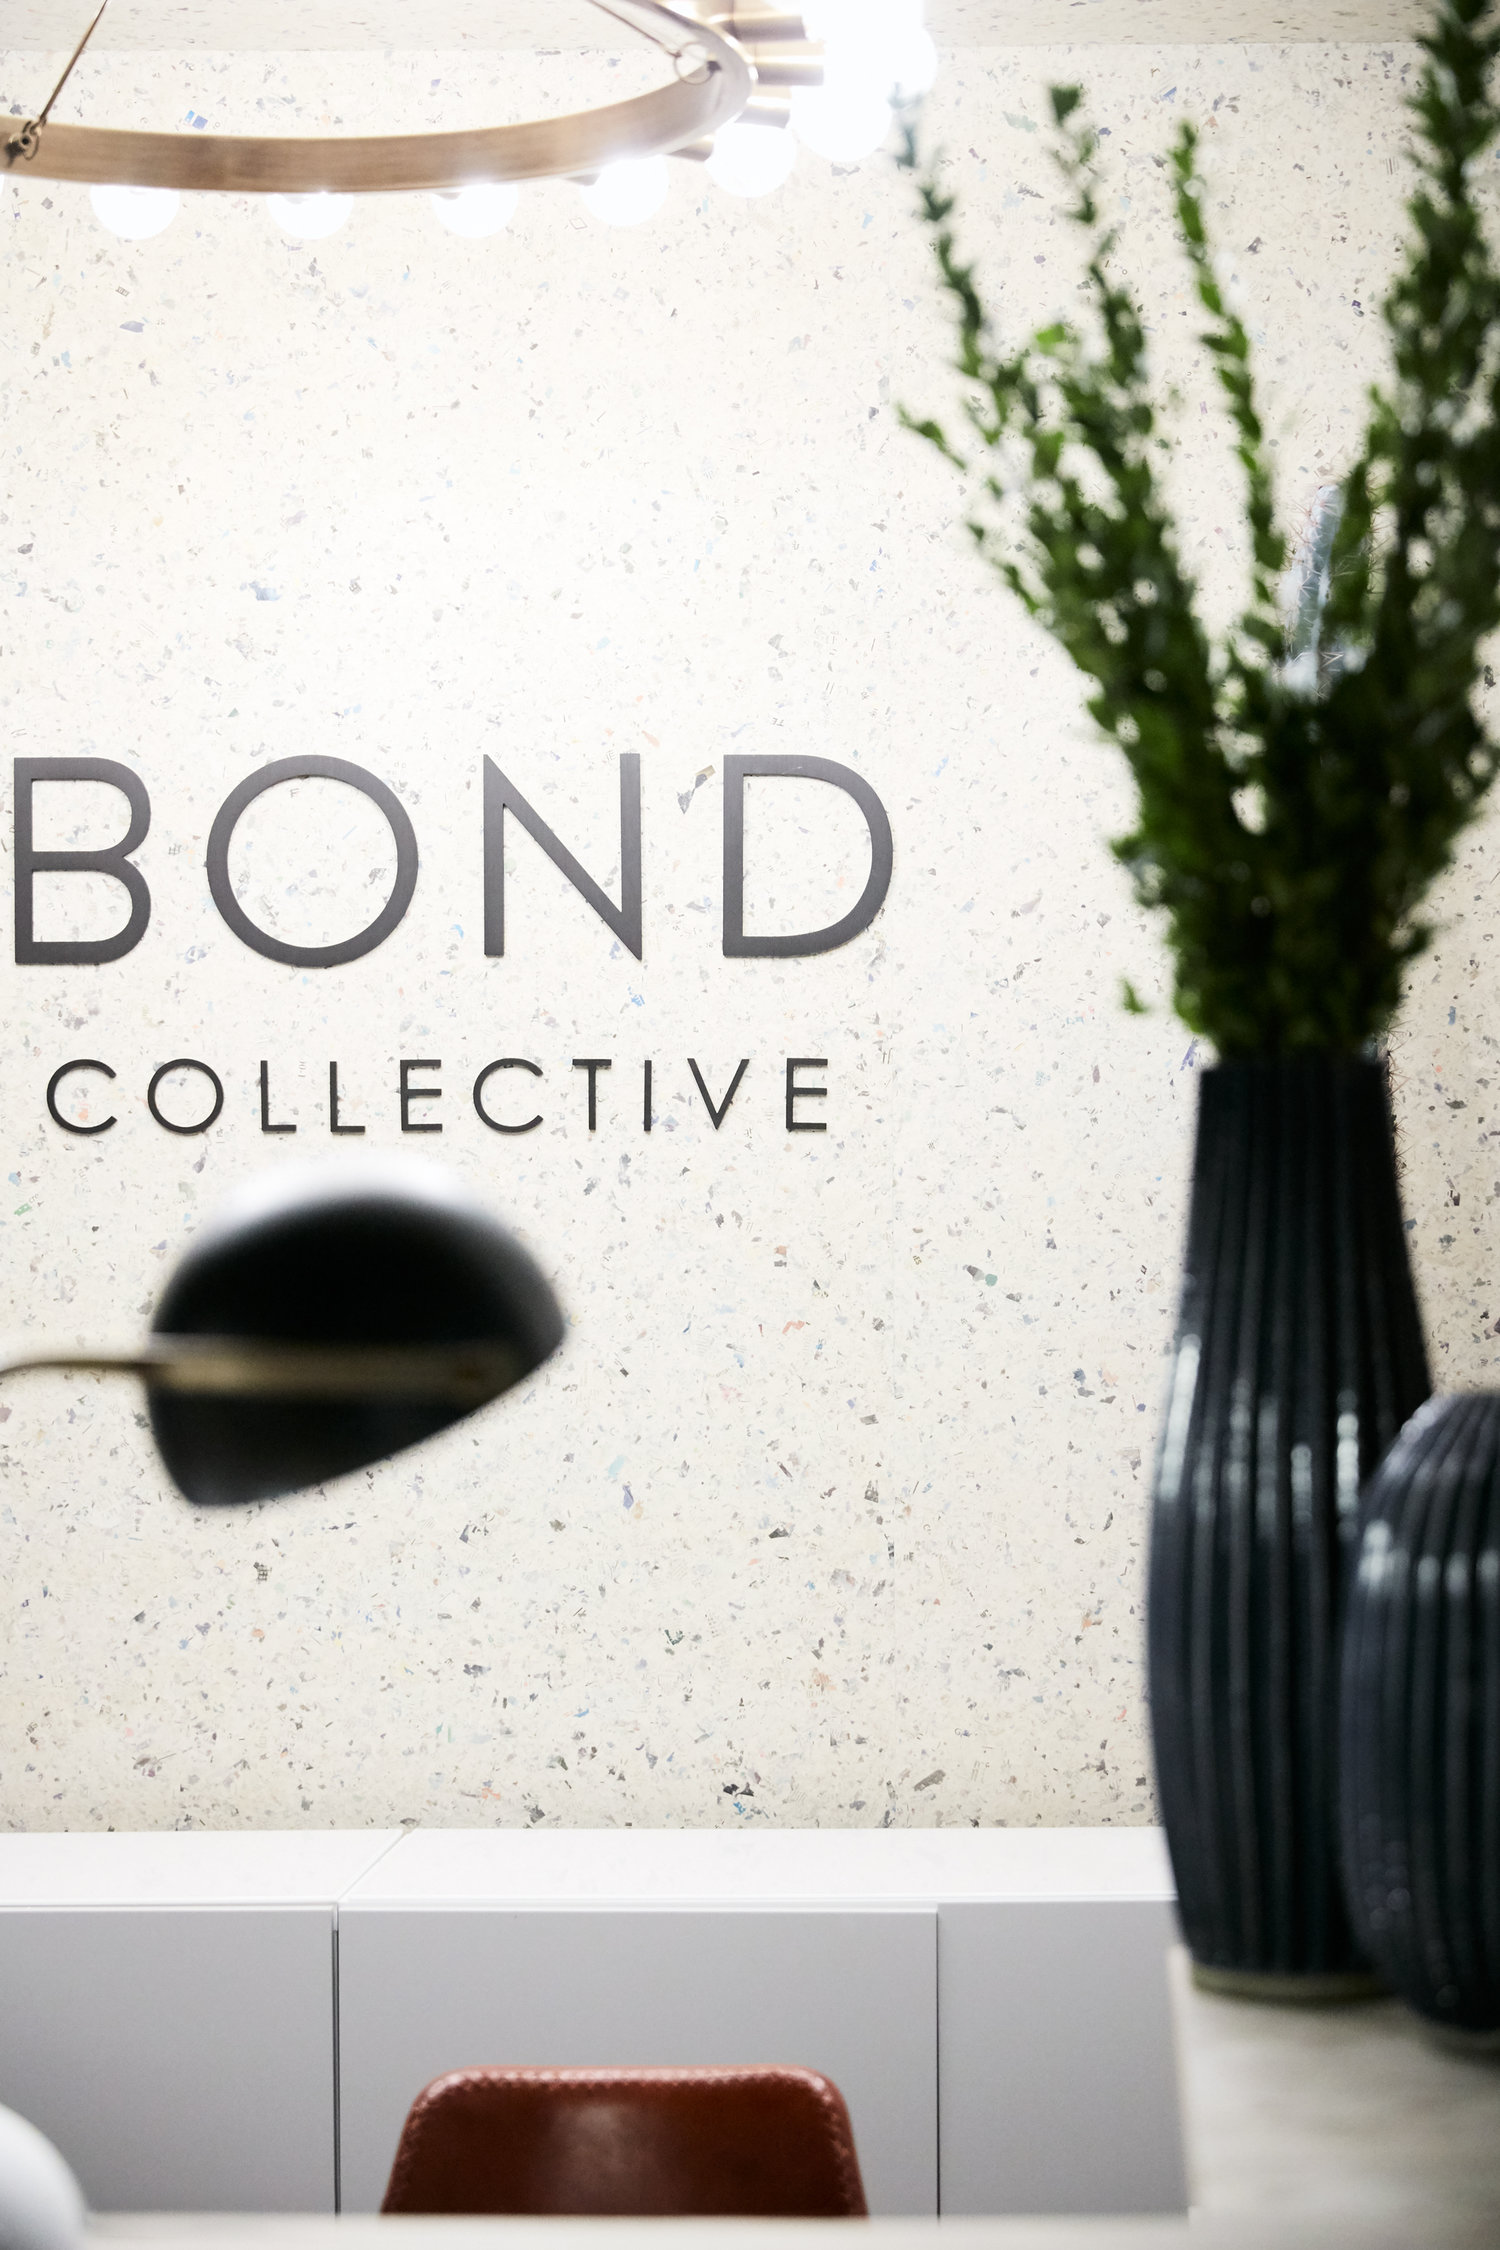 Bond Collective logo on a wall next to a plant